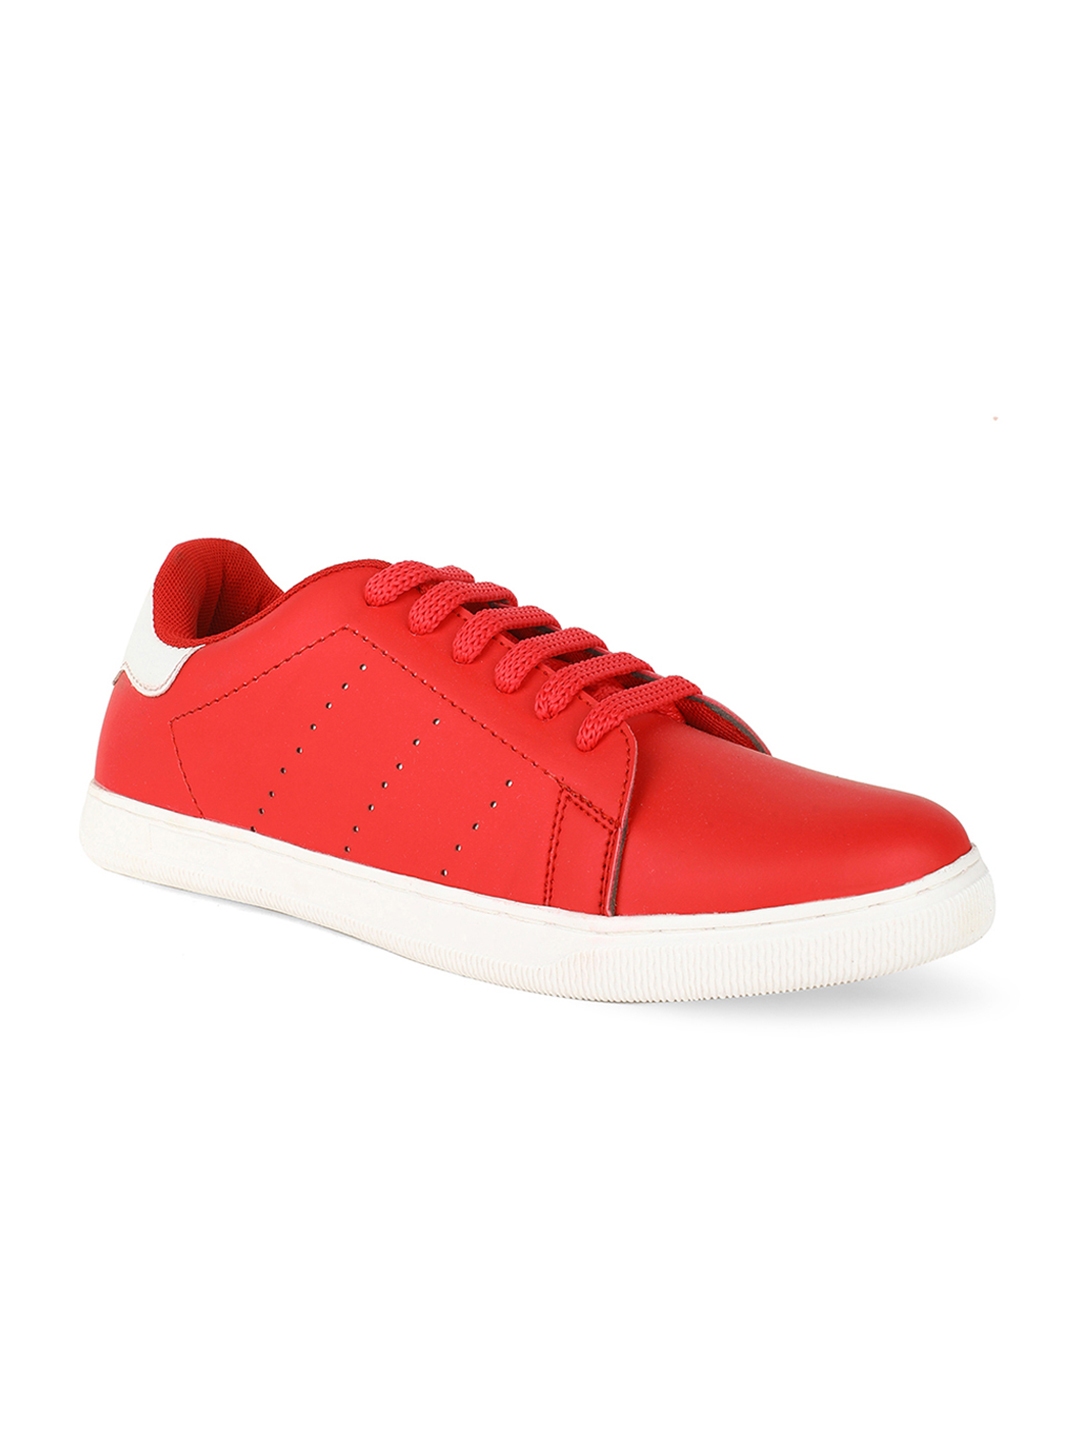 Buy Khadims Men Red Solid Sneakers - Casual Shoes for Men 12363010 | Myntra